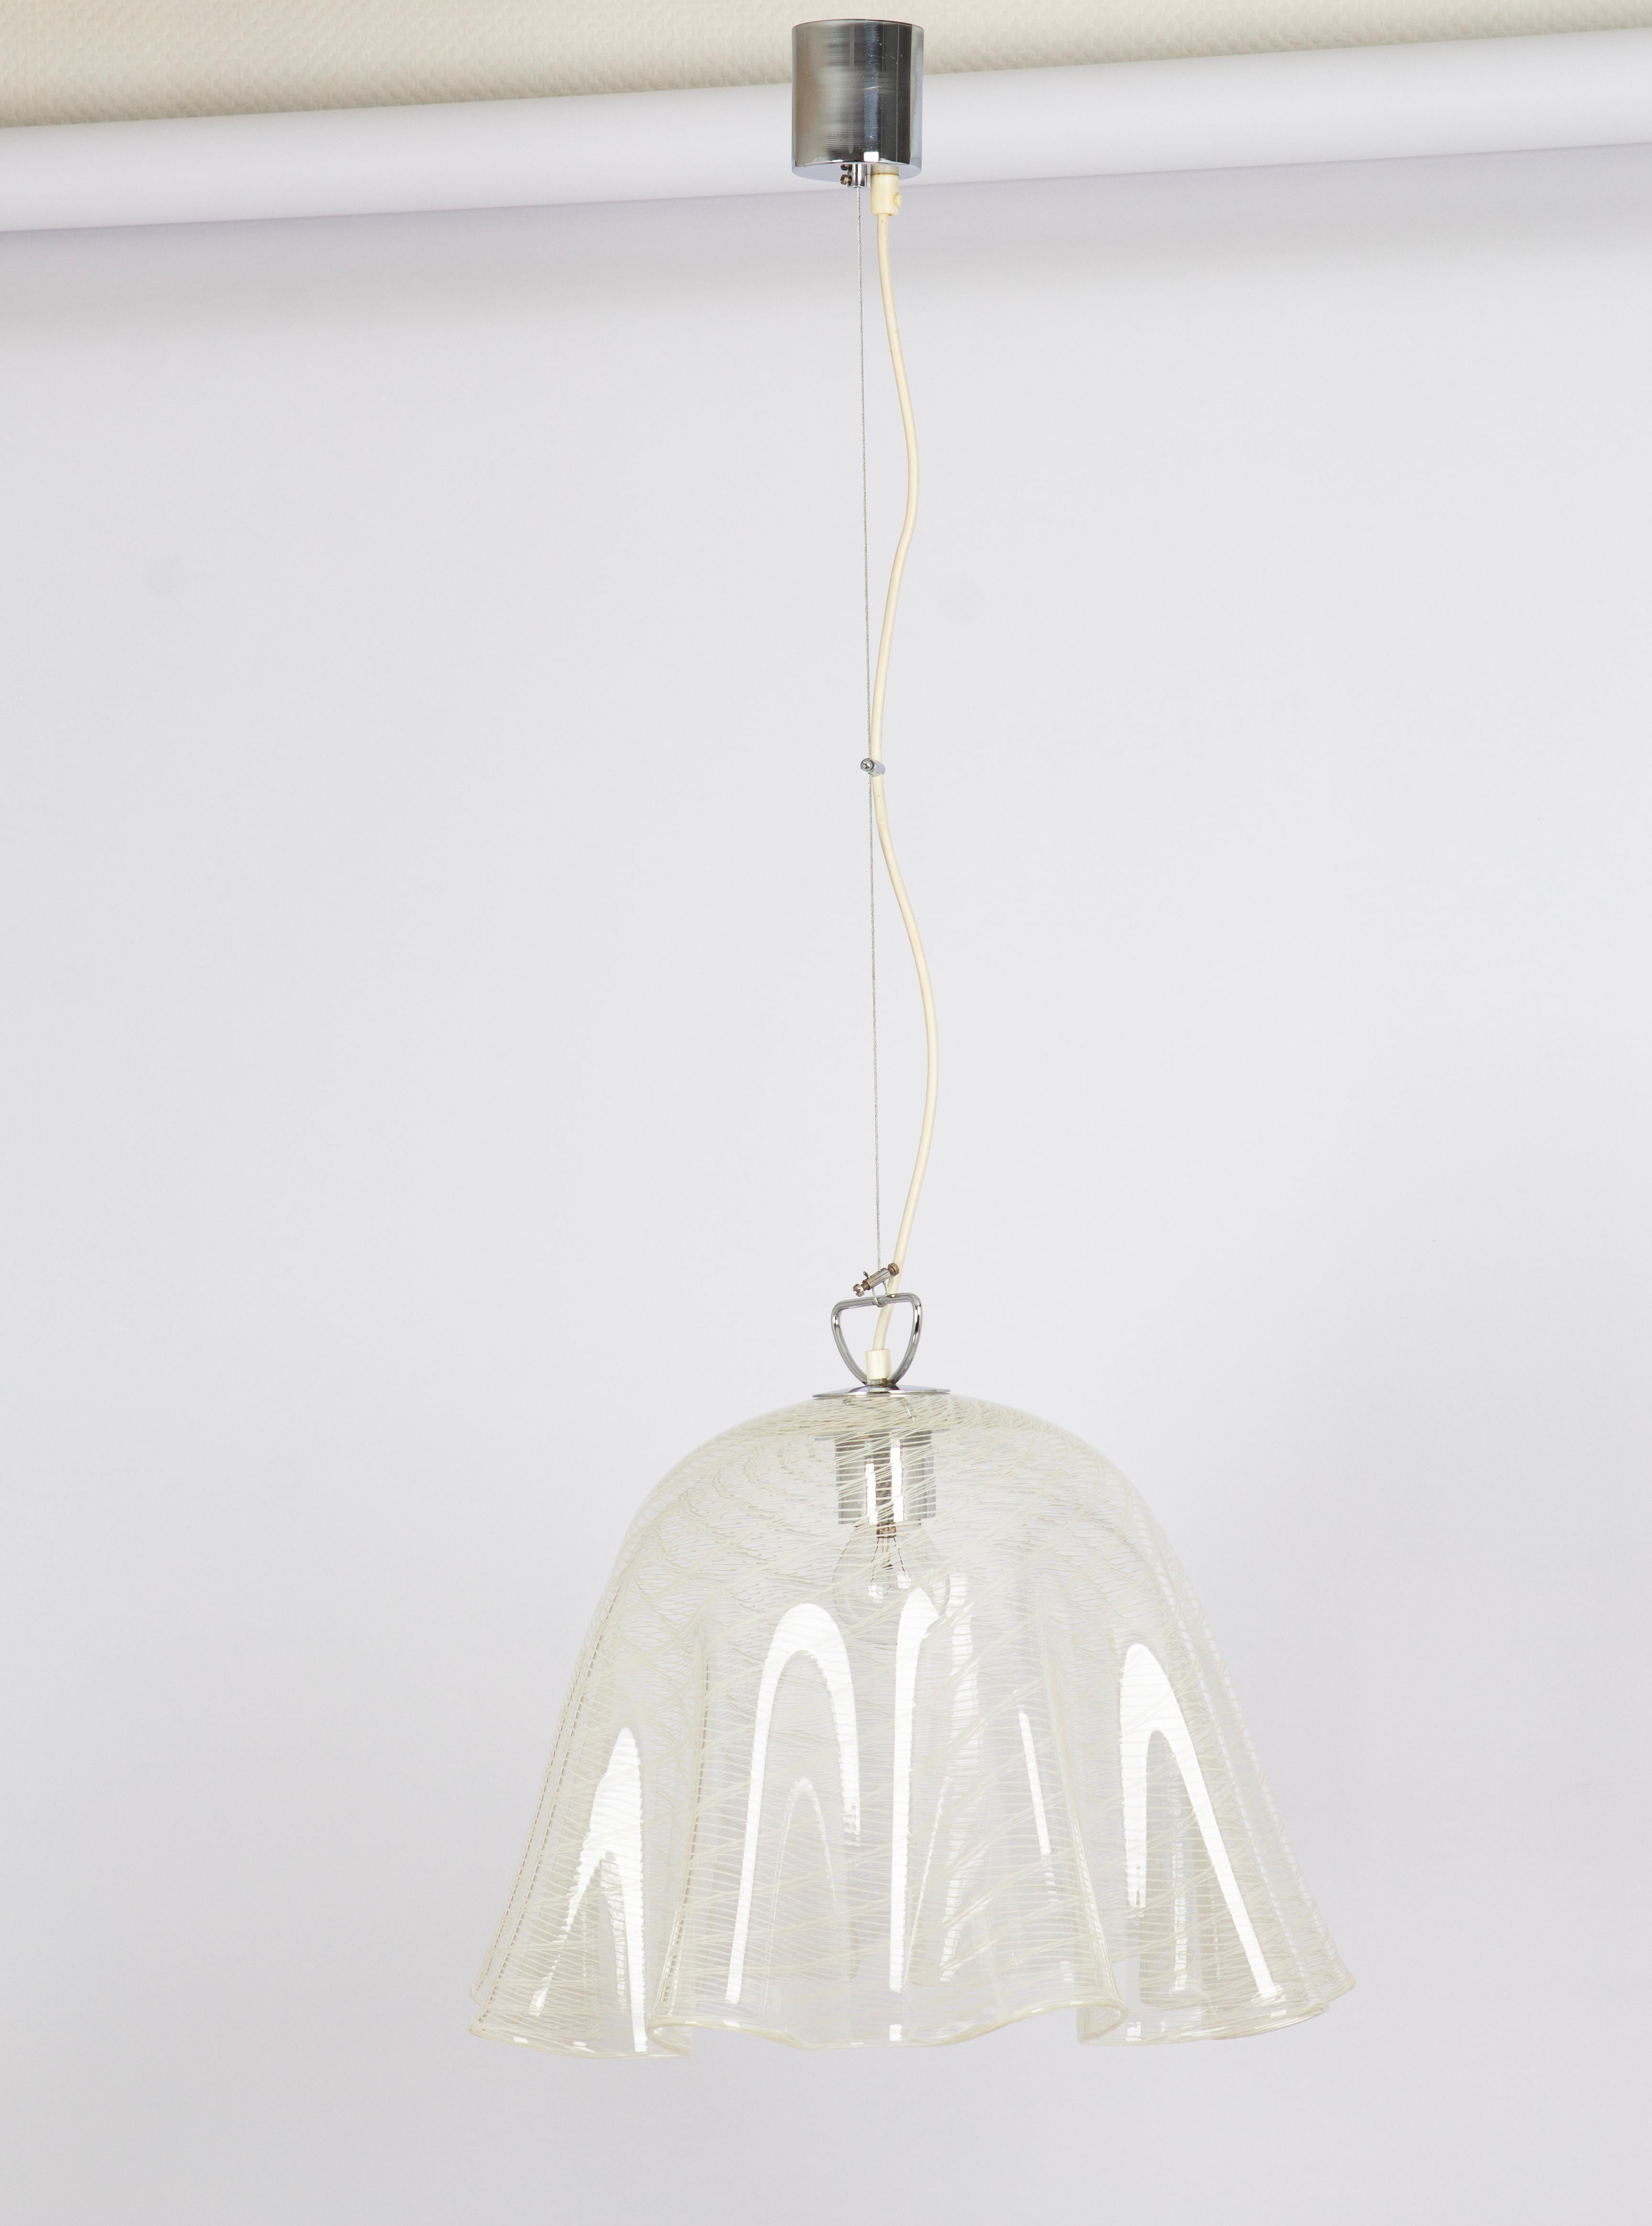 Stunning glass Pendant light by Kalmar -Name of this Serie: Fazzoletto, made in the 1970s
Nice structured glass, beautifully refracting the light.
High quality and in very good condition. Cleaned, well-wired, and ready to use.
The fixture requires 1